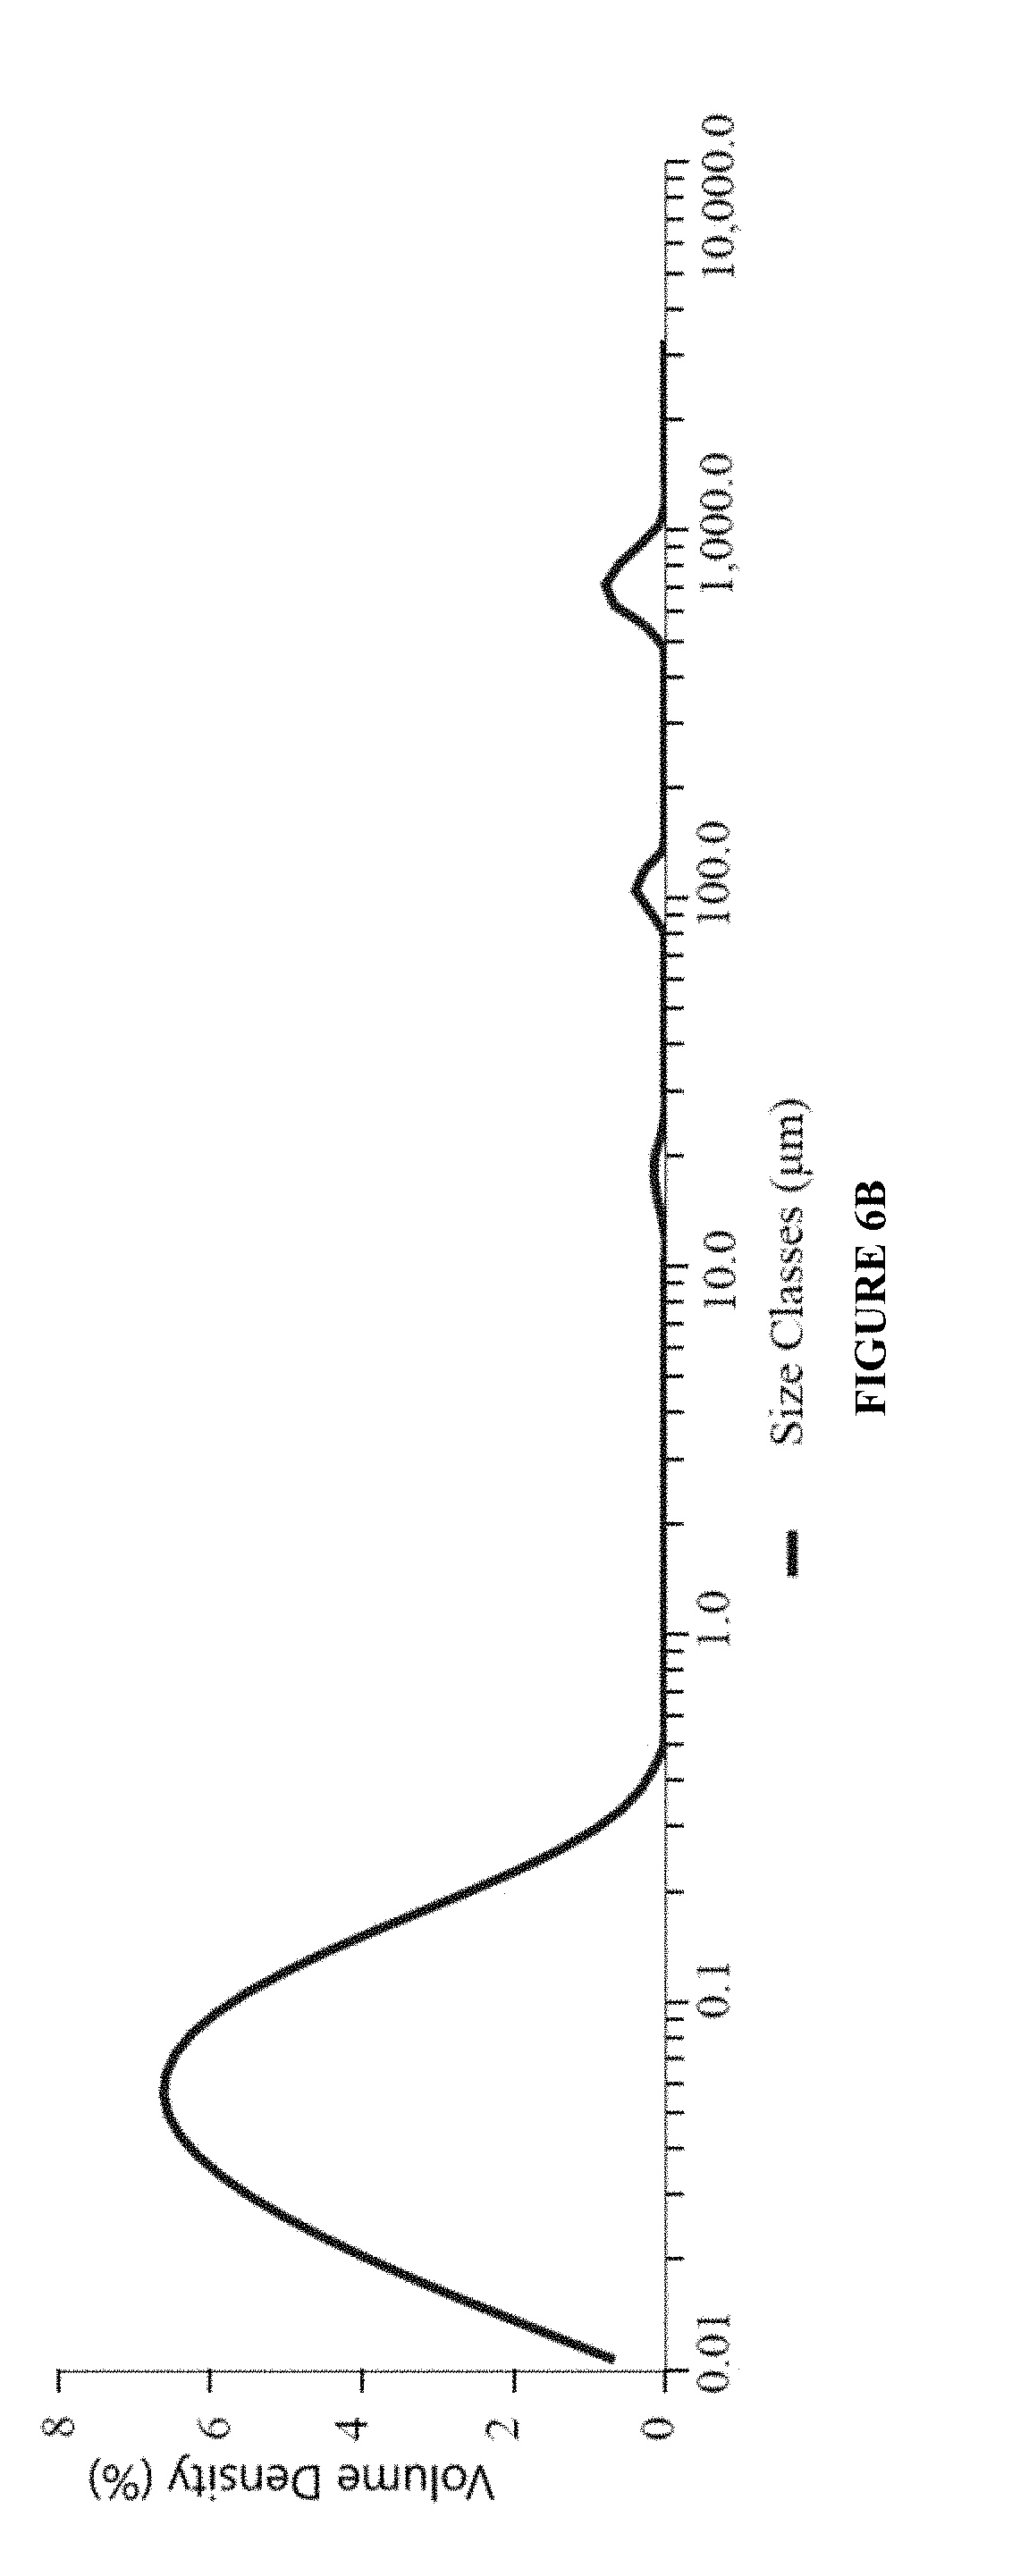 Ophthalmic compositions and methods of use